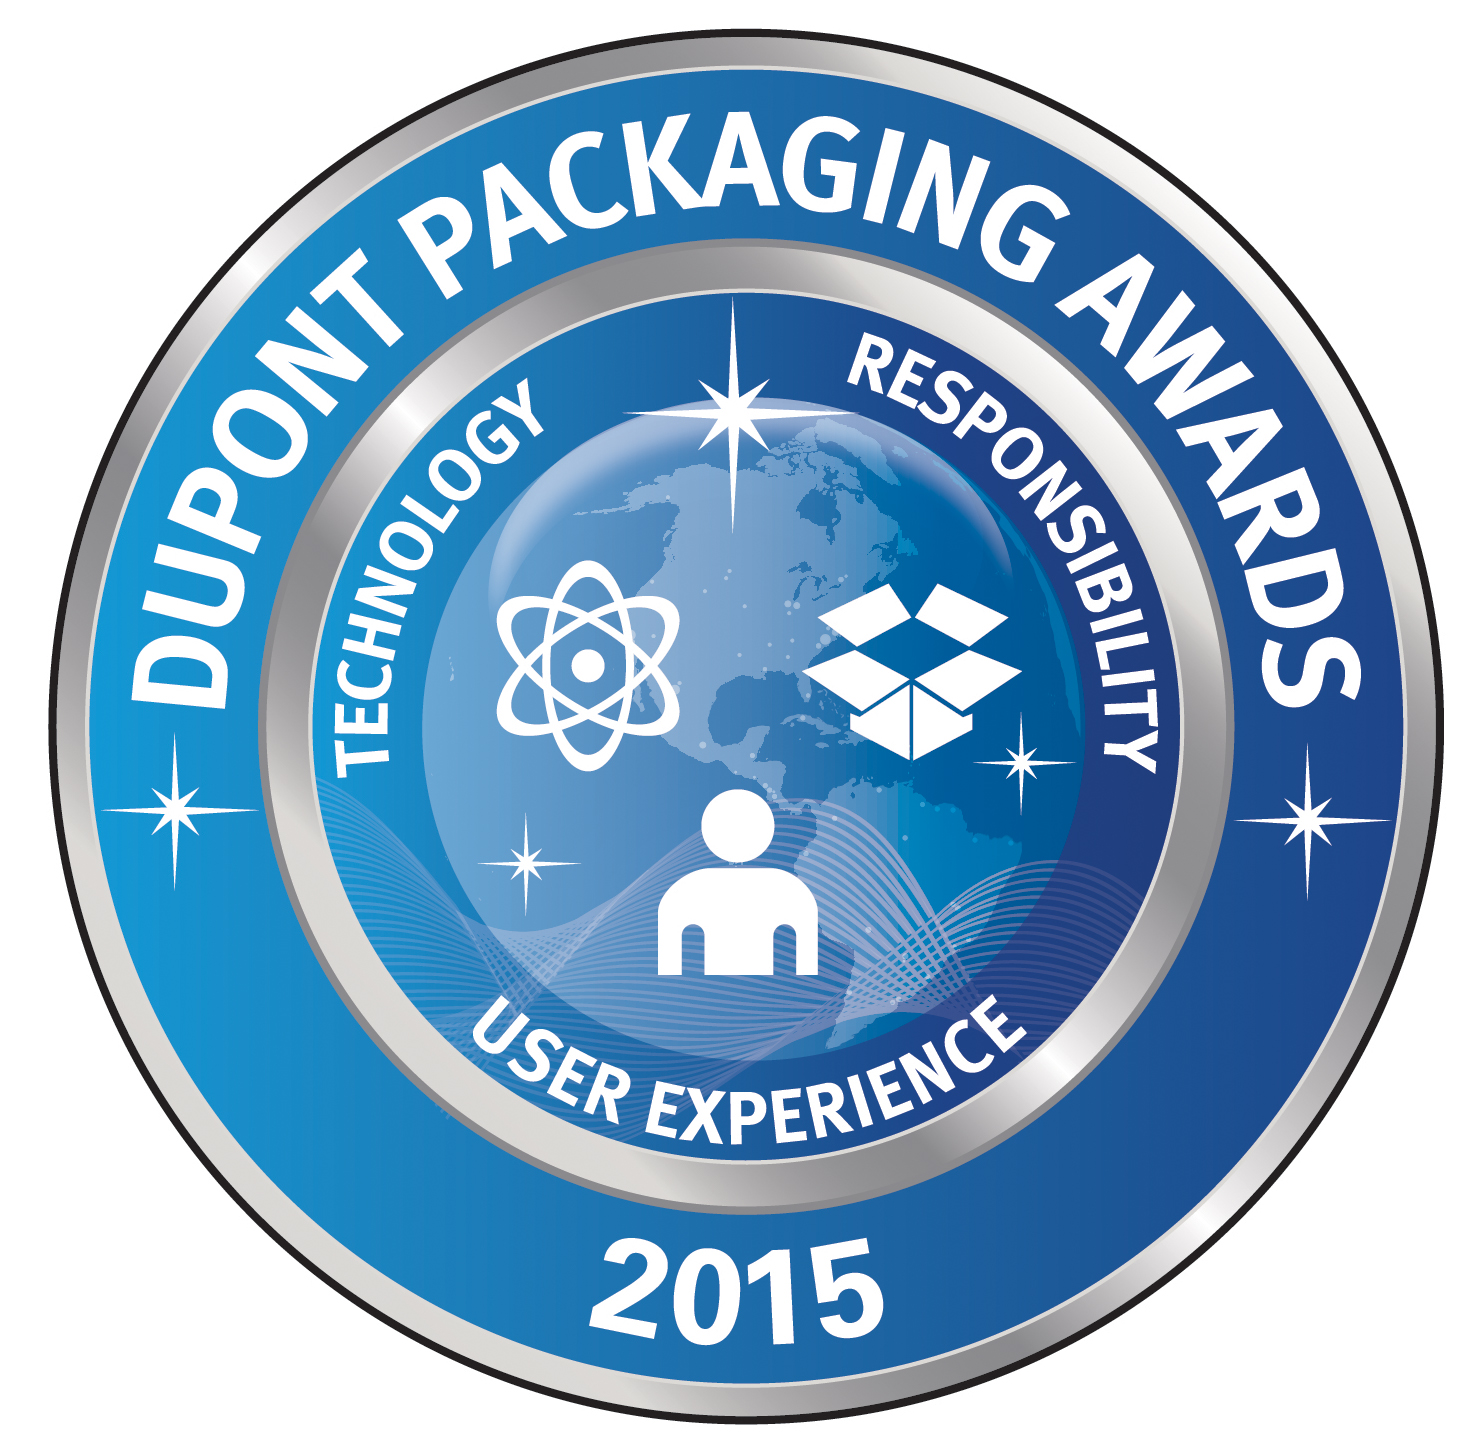 27th DuPont Awards for Packaging Innovation